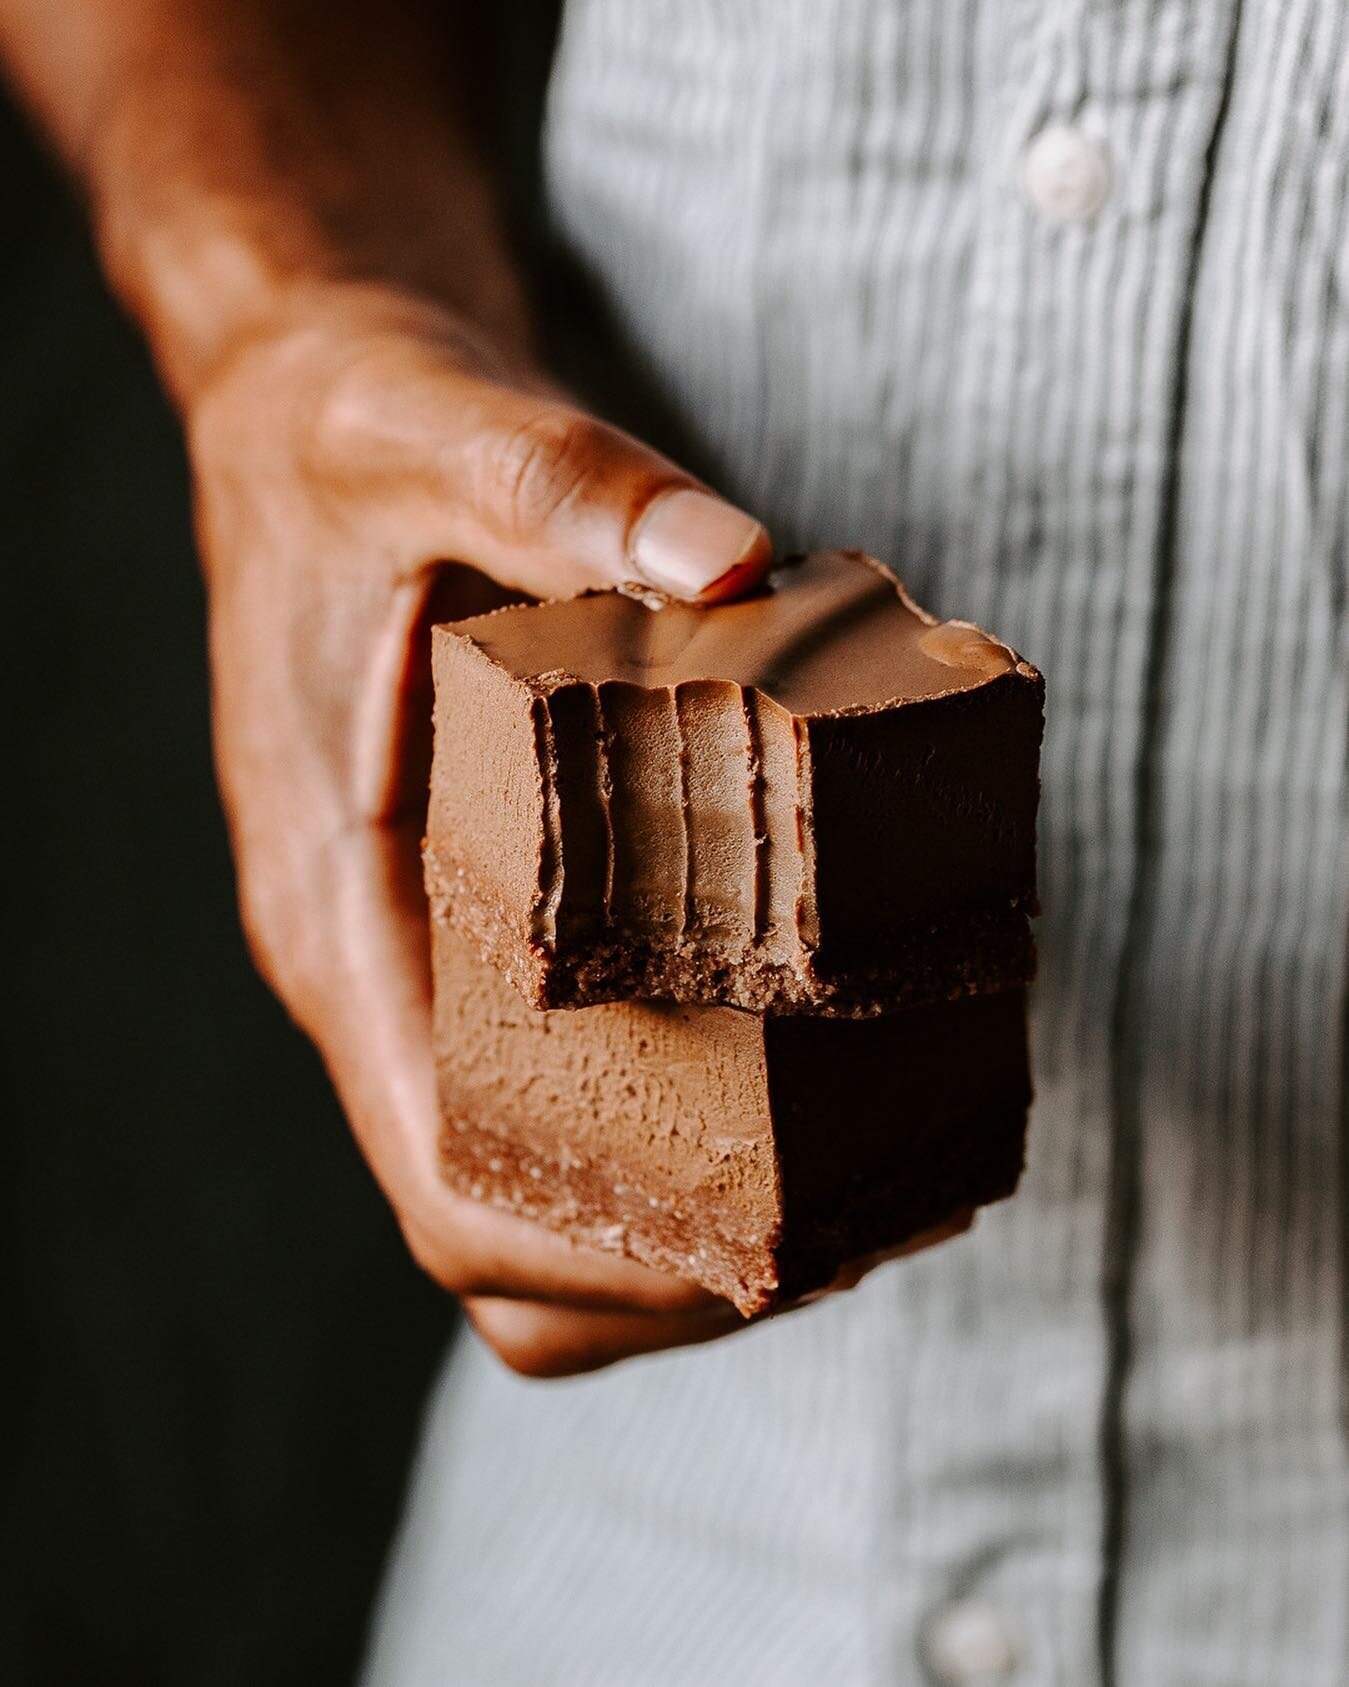 It&rsquo;s been way too long since I&rsquo;ve made my Paleo Chocolate Mousse Slice! I definitely need to add this to my to-do list so I can make it this week 😉. The texture is INCREDIBLE! Imagine a cross between a fudgey cheesecake meets chocolate m